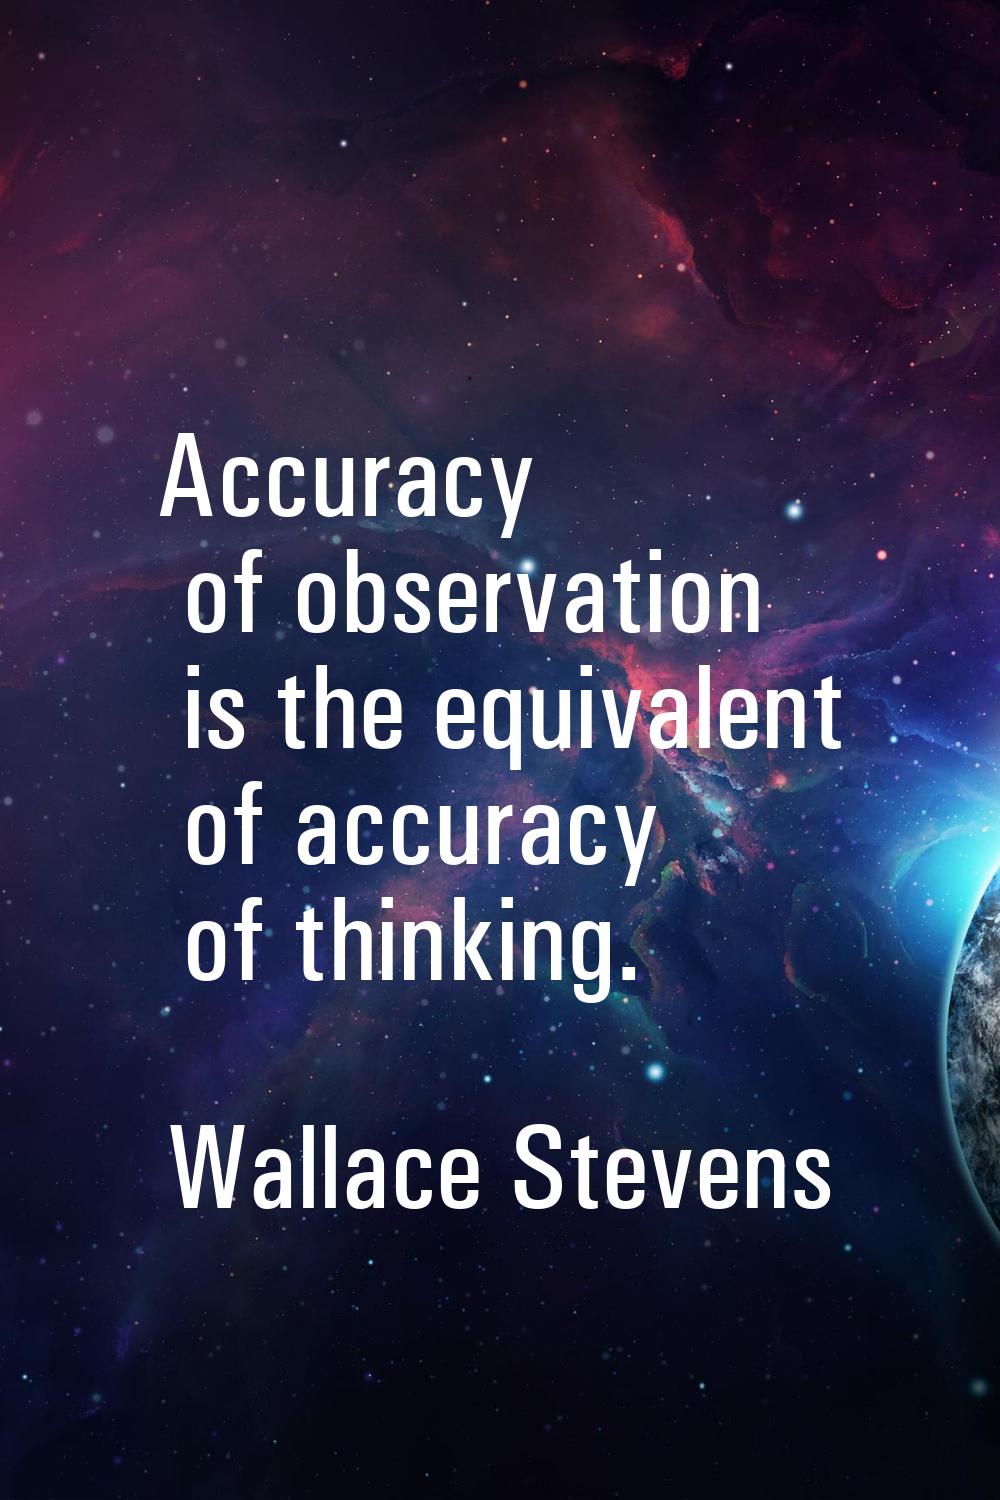 Accuracy of observation is the equivalent of accuracy of thinking.